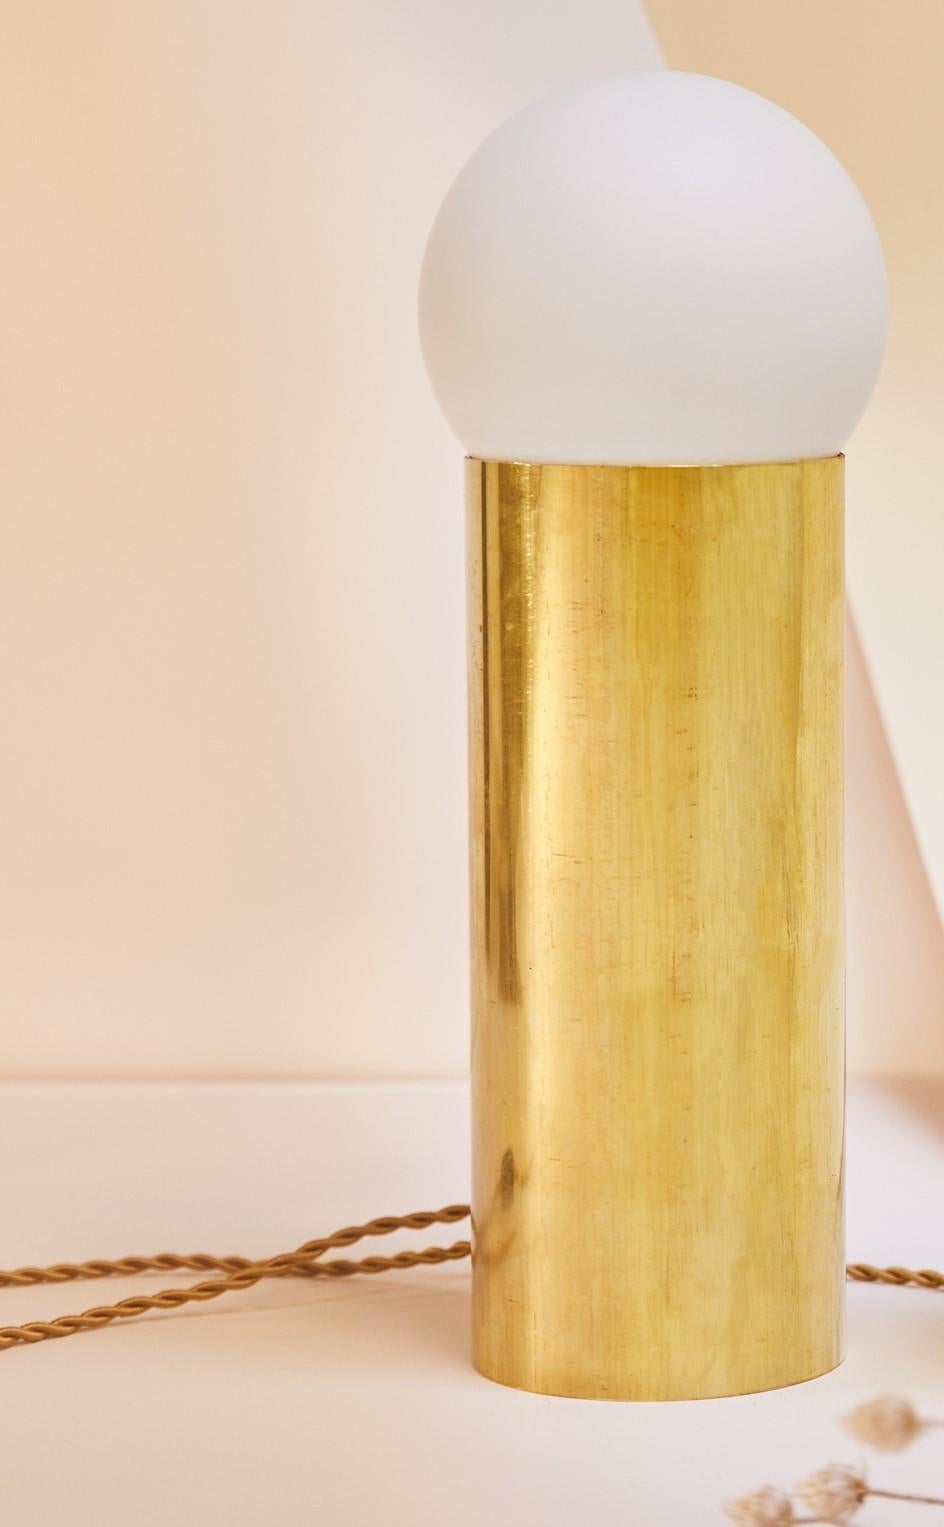 Tall astree lamp by Pia Chevalier
Raw solid brass and porcelain.
Dimensions: H 24 cm ø11cm
Tala bulb: diameter 13 cm
Cable length: 1m 50

Pia Chevalier is a French contemporary designer.
Independent Designer, trained in Design and Crafts and